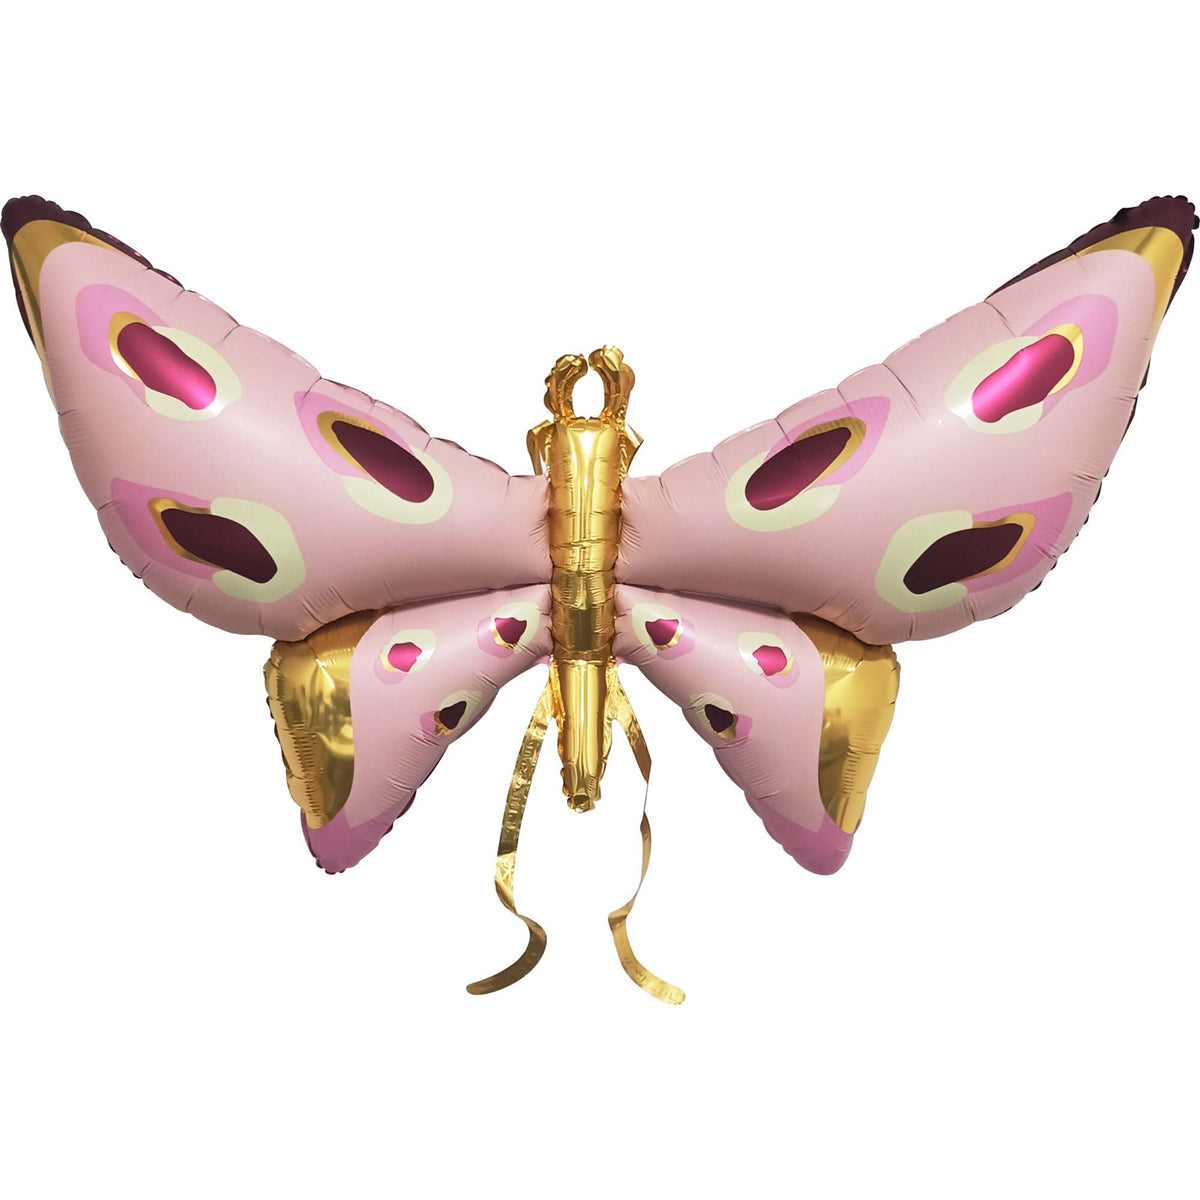 LE GROUPE BLC INTL INC Balloons Rose Gold Deluxe Butterfly Wings Supershape Balloon, 1 Count